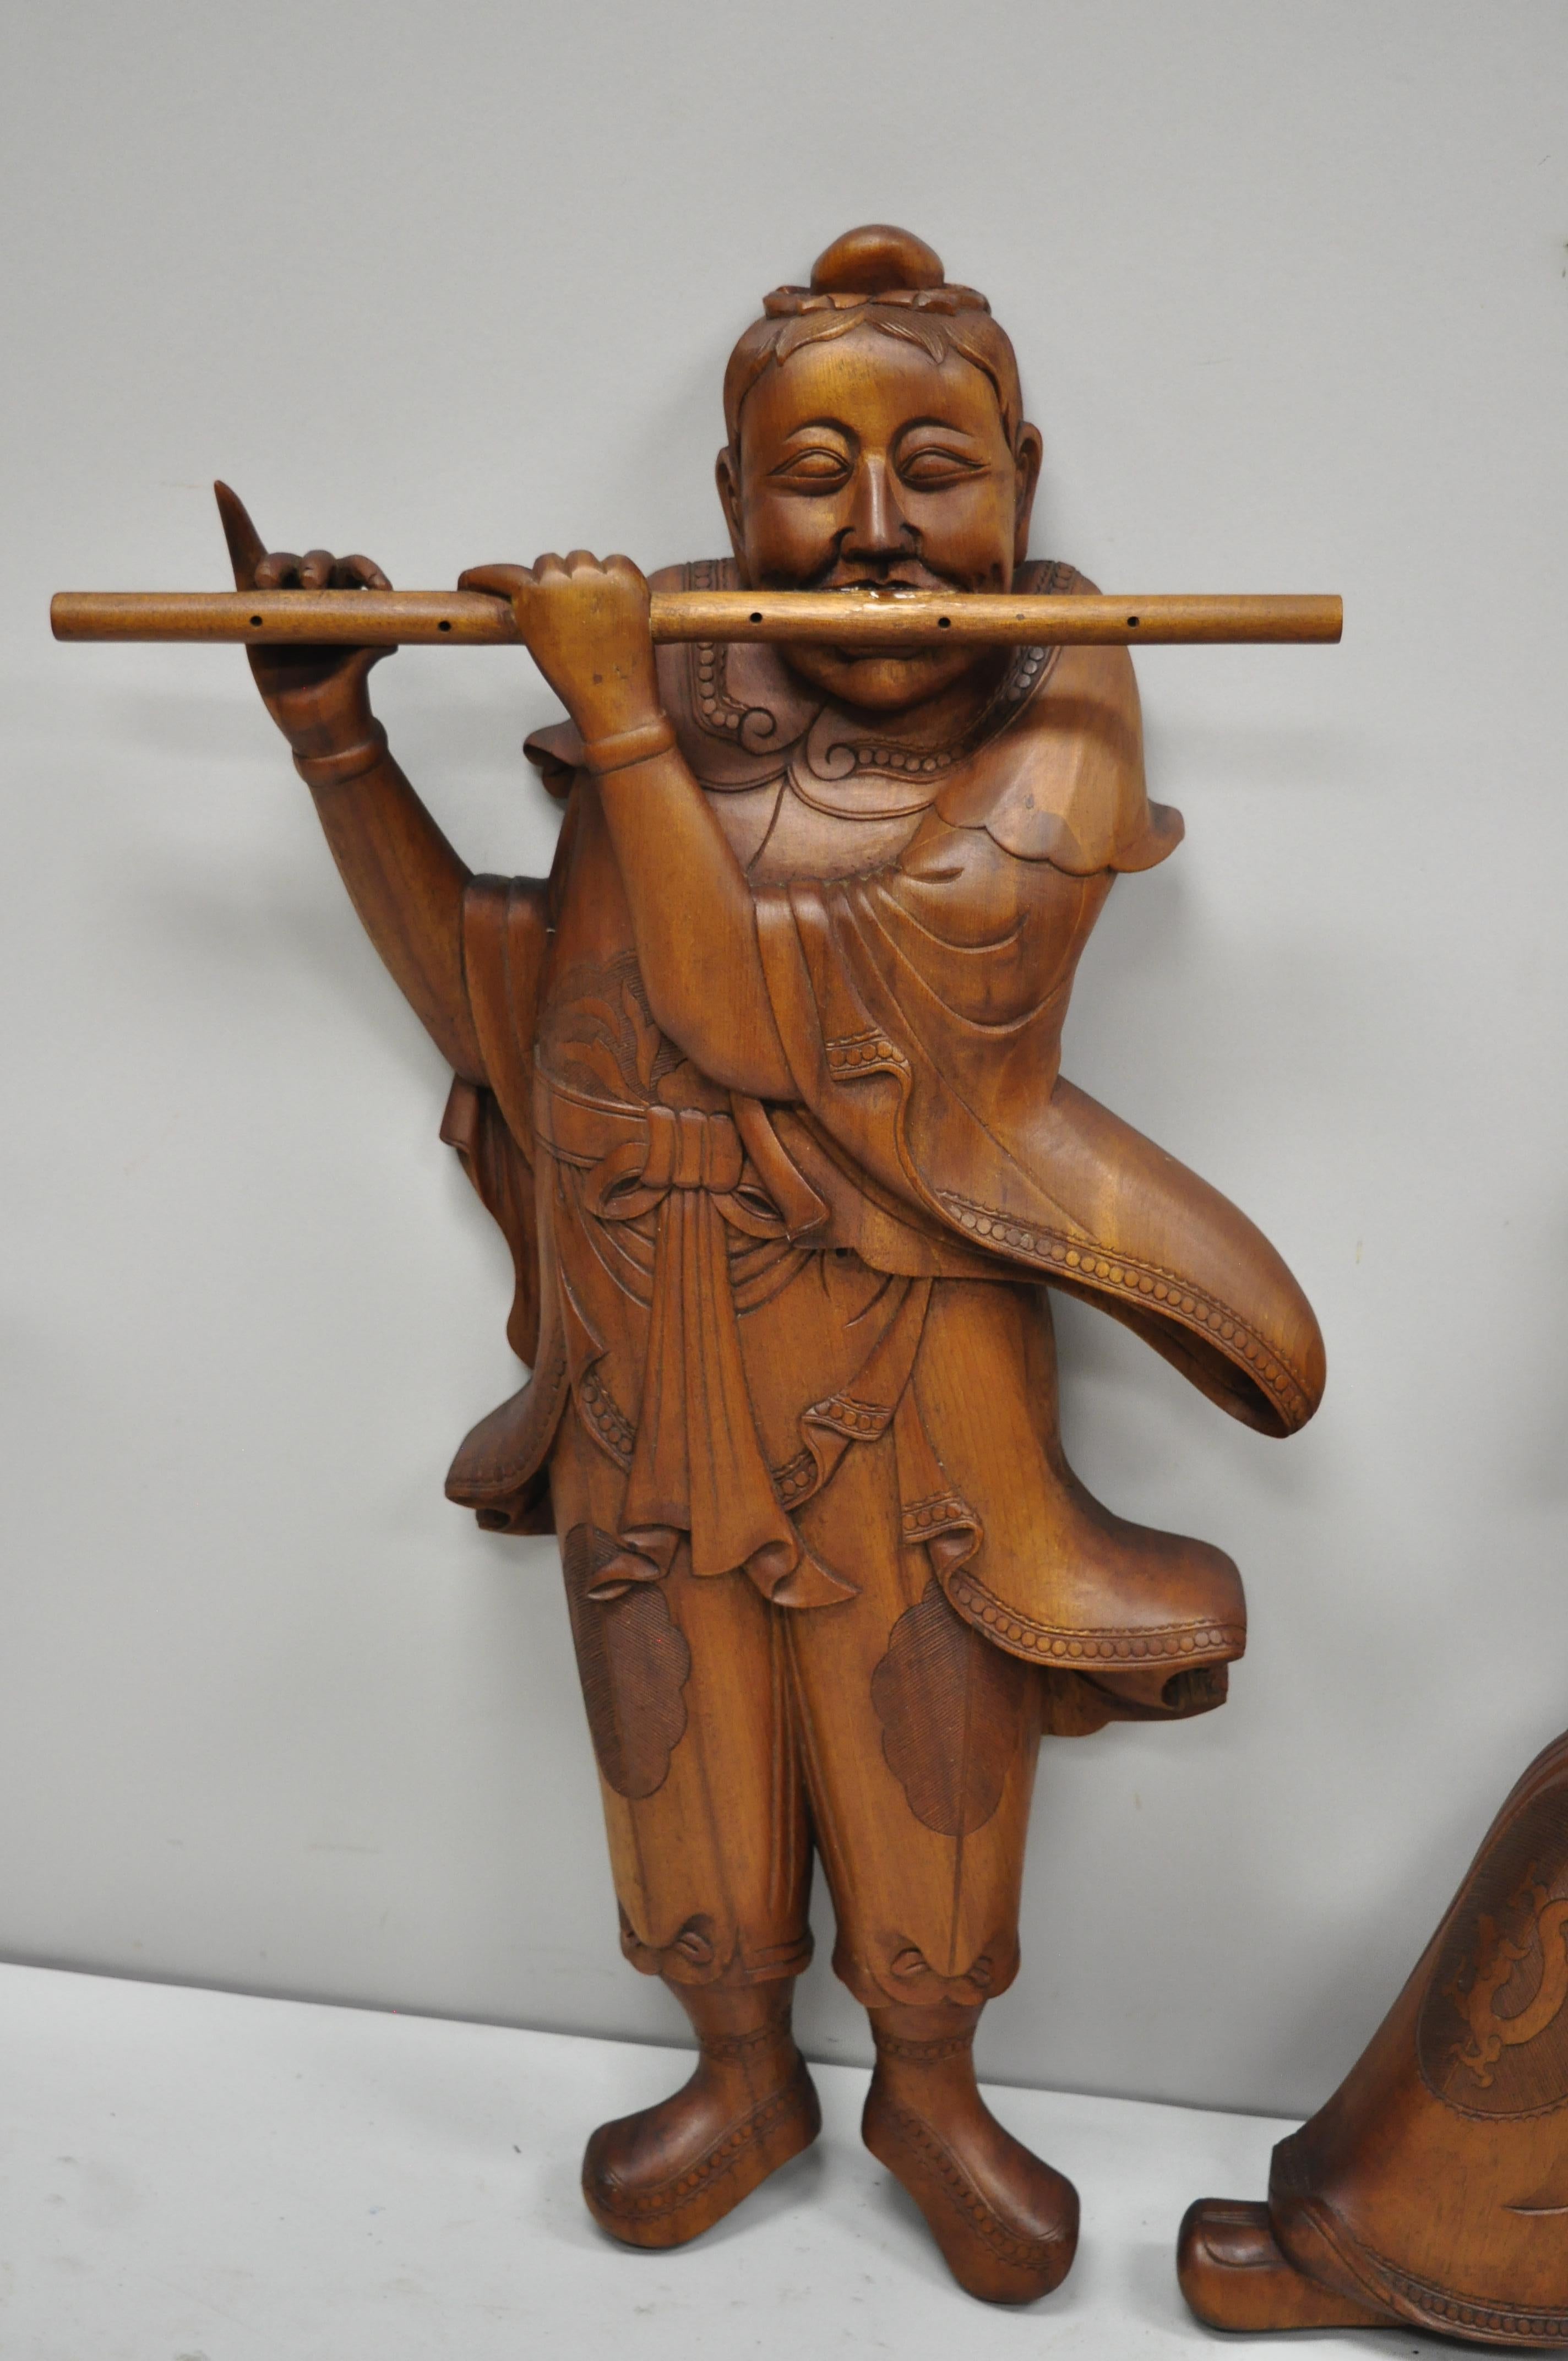 Pair of vintage Ricardo Lynn carved teak wood oriental figures flute player Wiseman. Items feature large impressive form, flute playing woman, wiseman seated on garden stool, remarkable details, solid teak wood construction, beautiful wood grain,